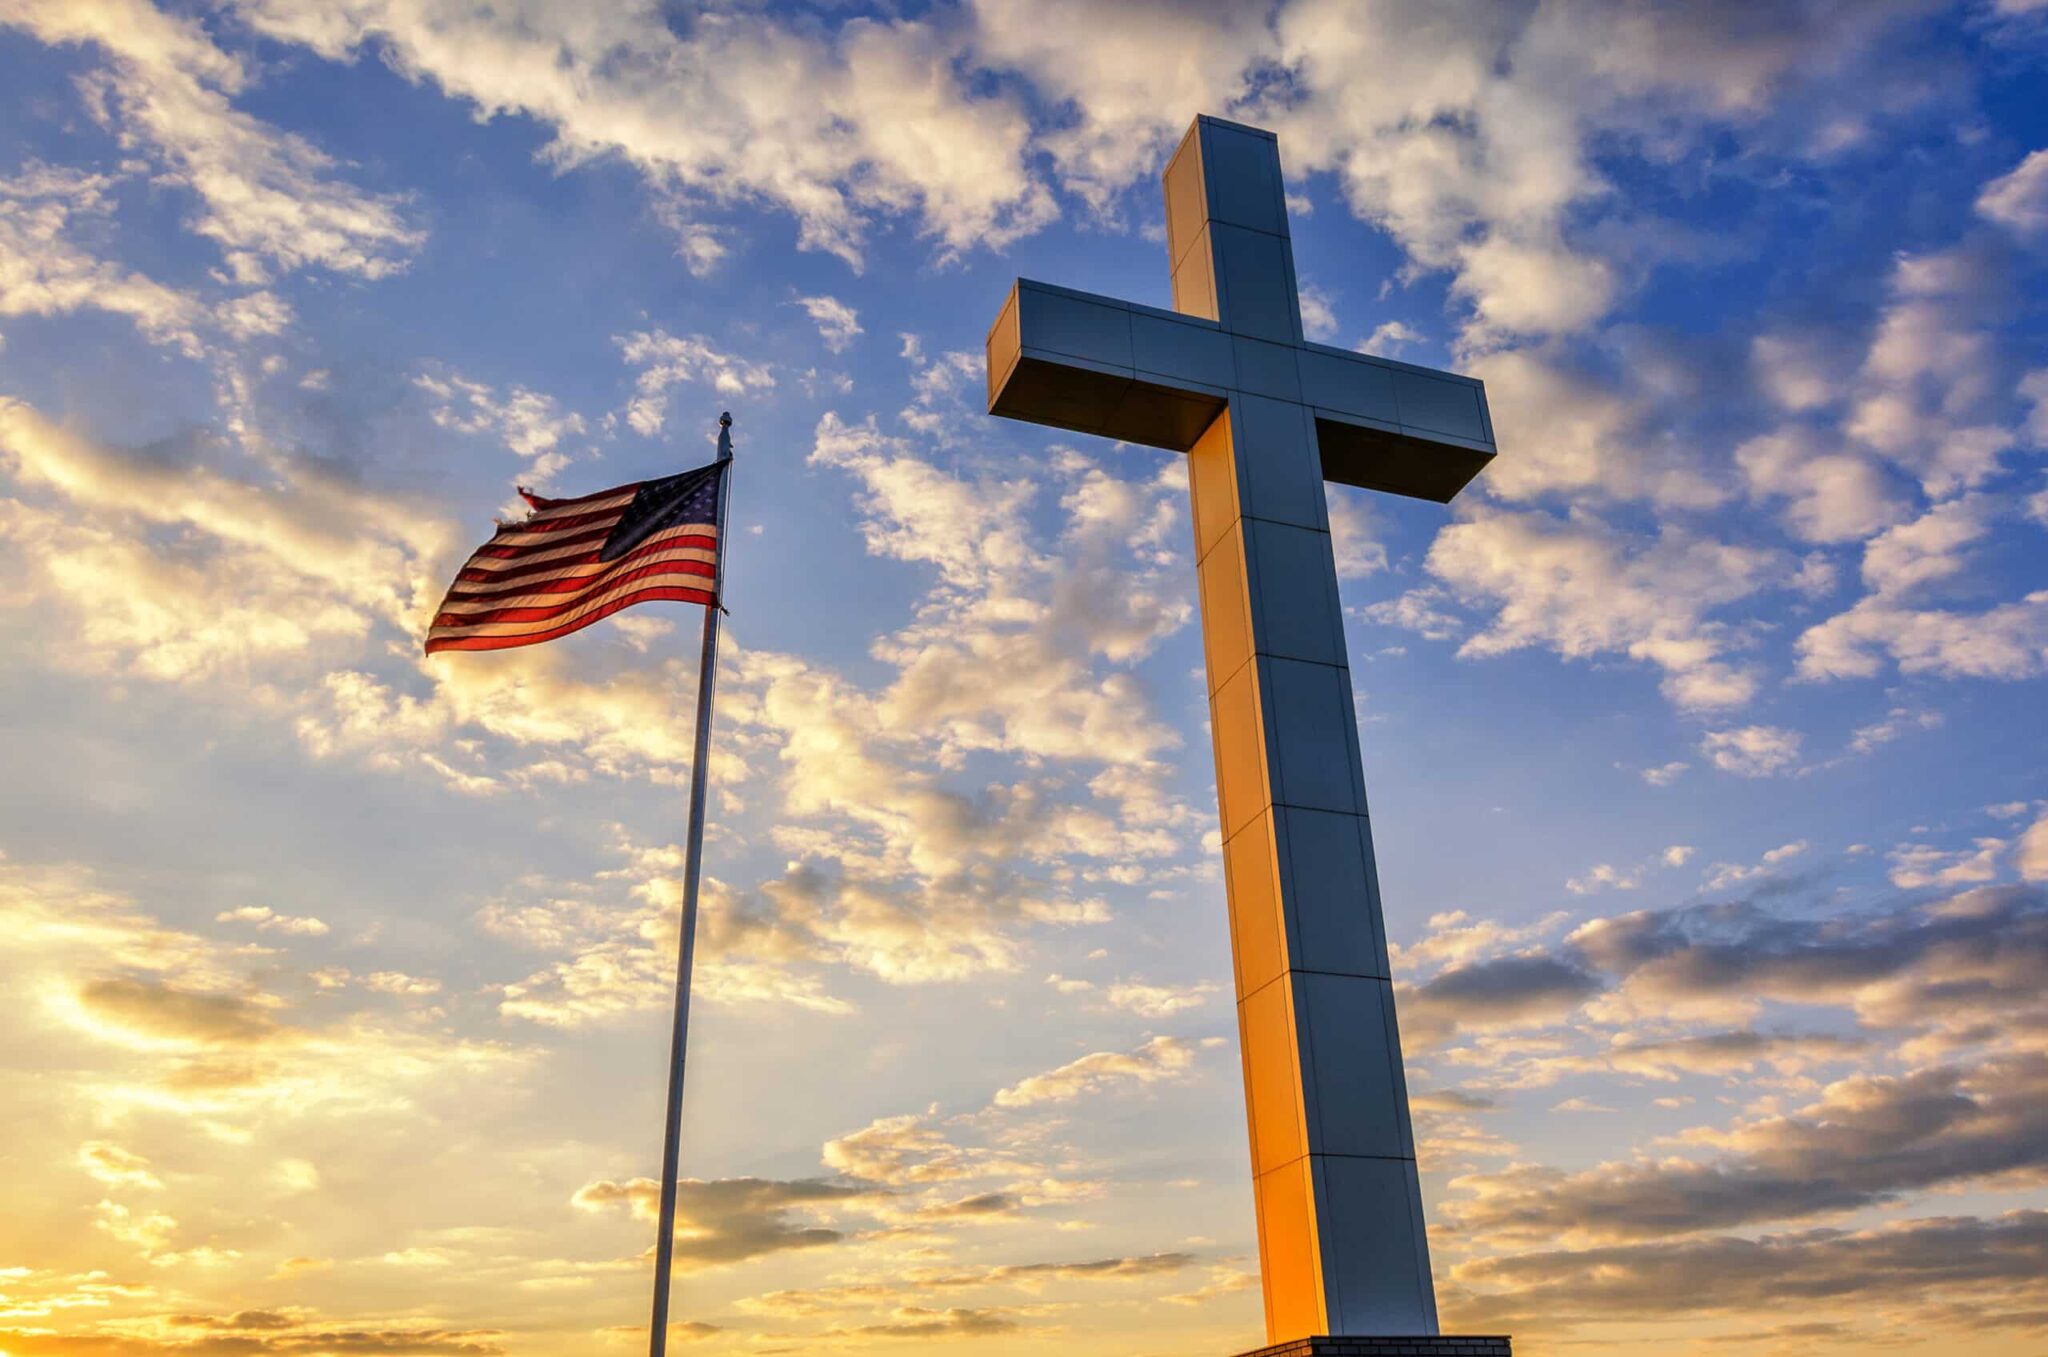 American,Flag,And,Religious,Cross,At,Sunset